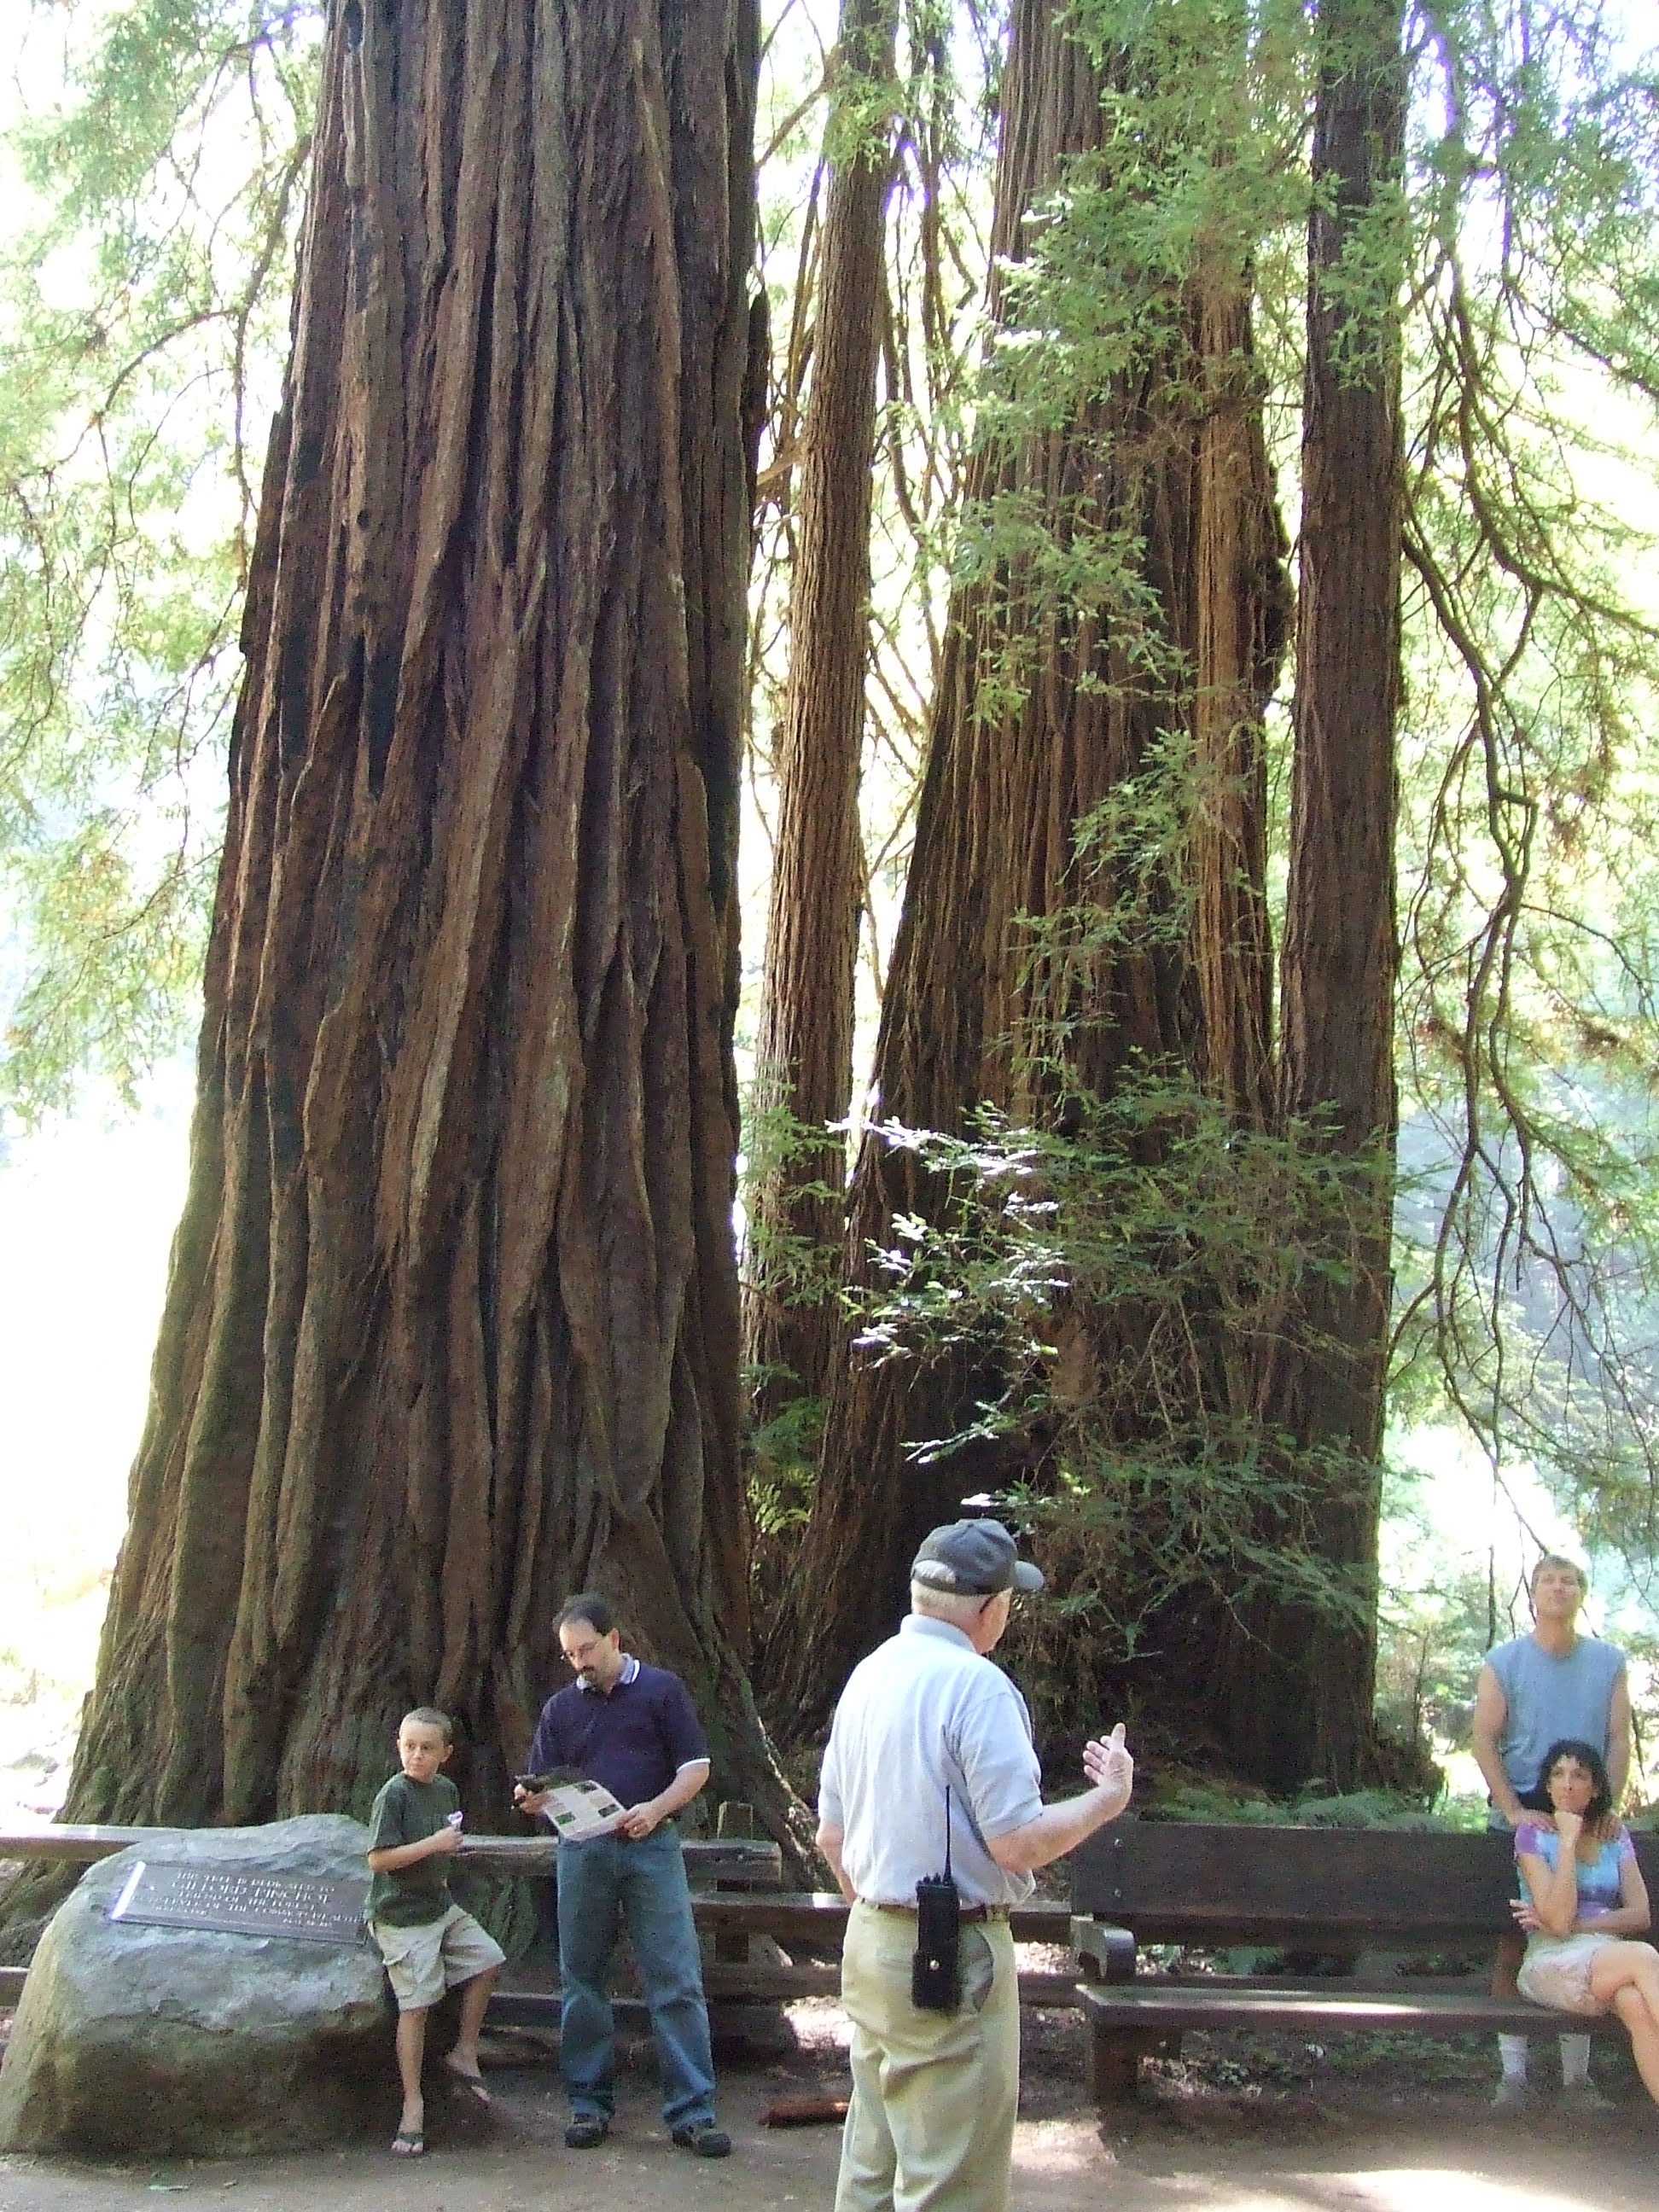 Muir Woods ミュアウッズ国定公園 Life In Bay Area